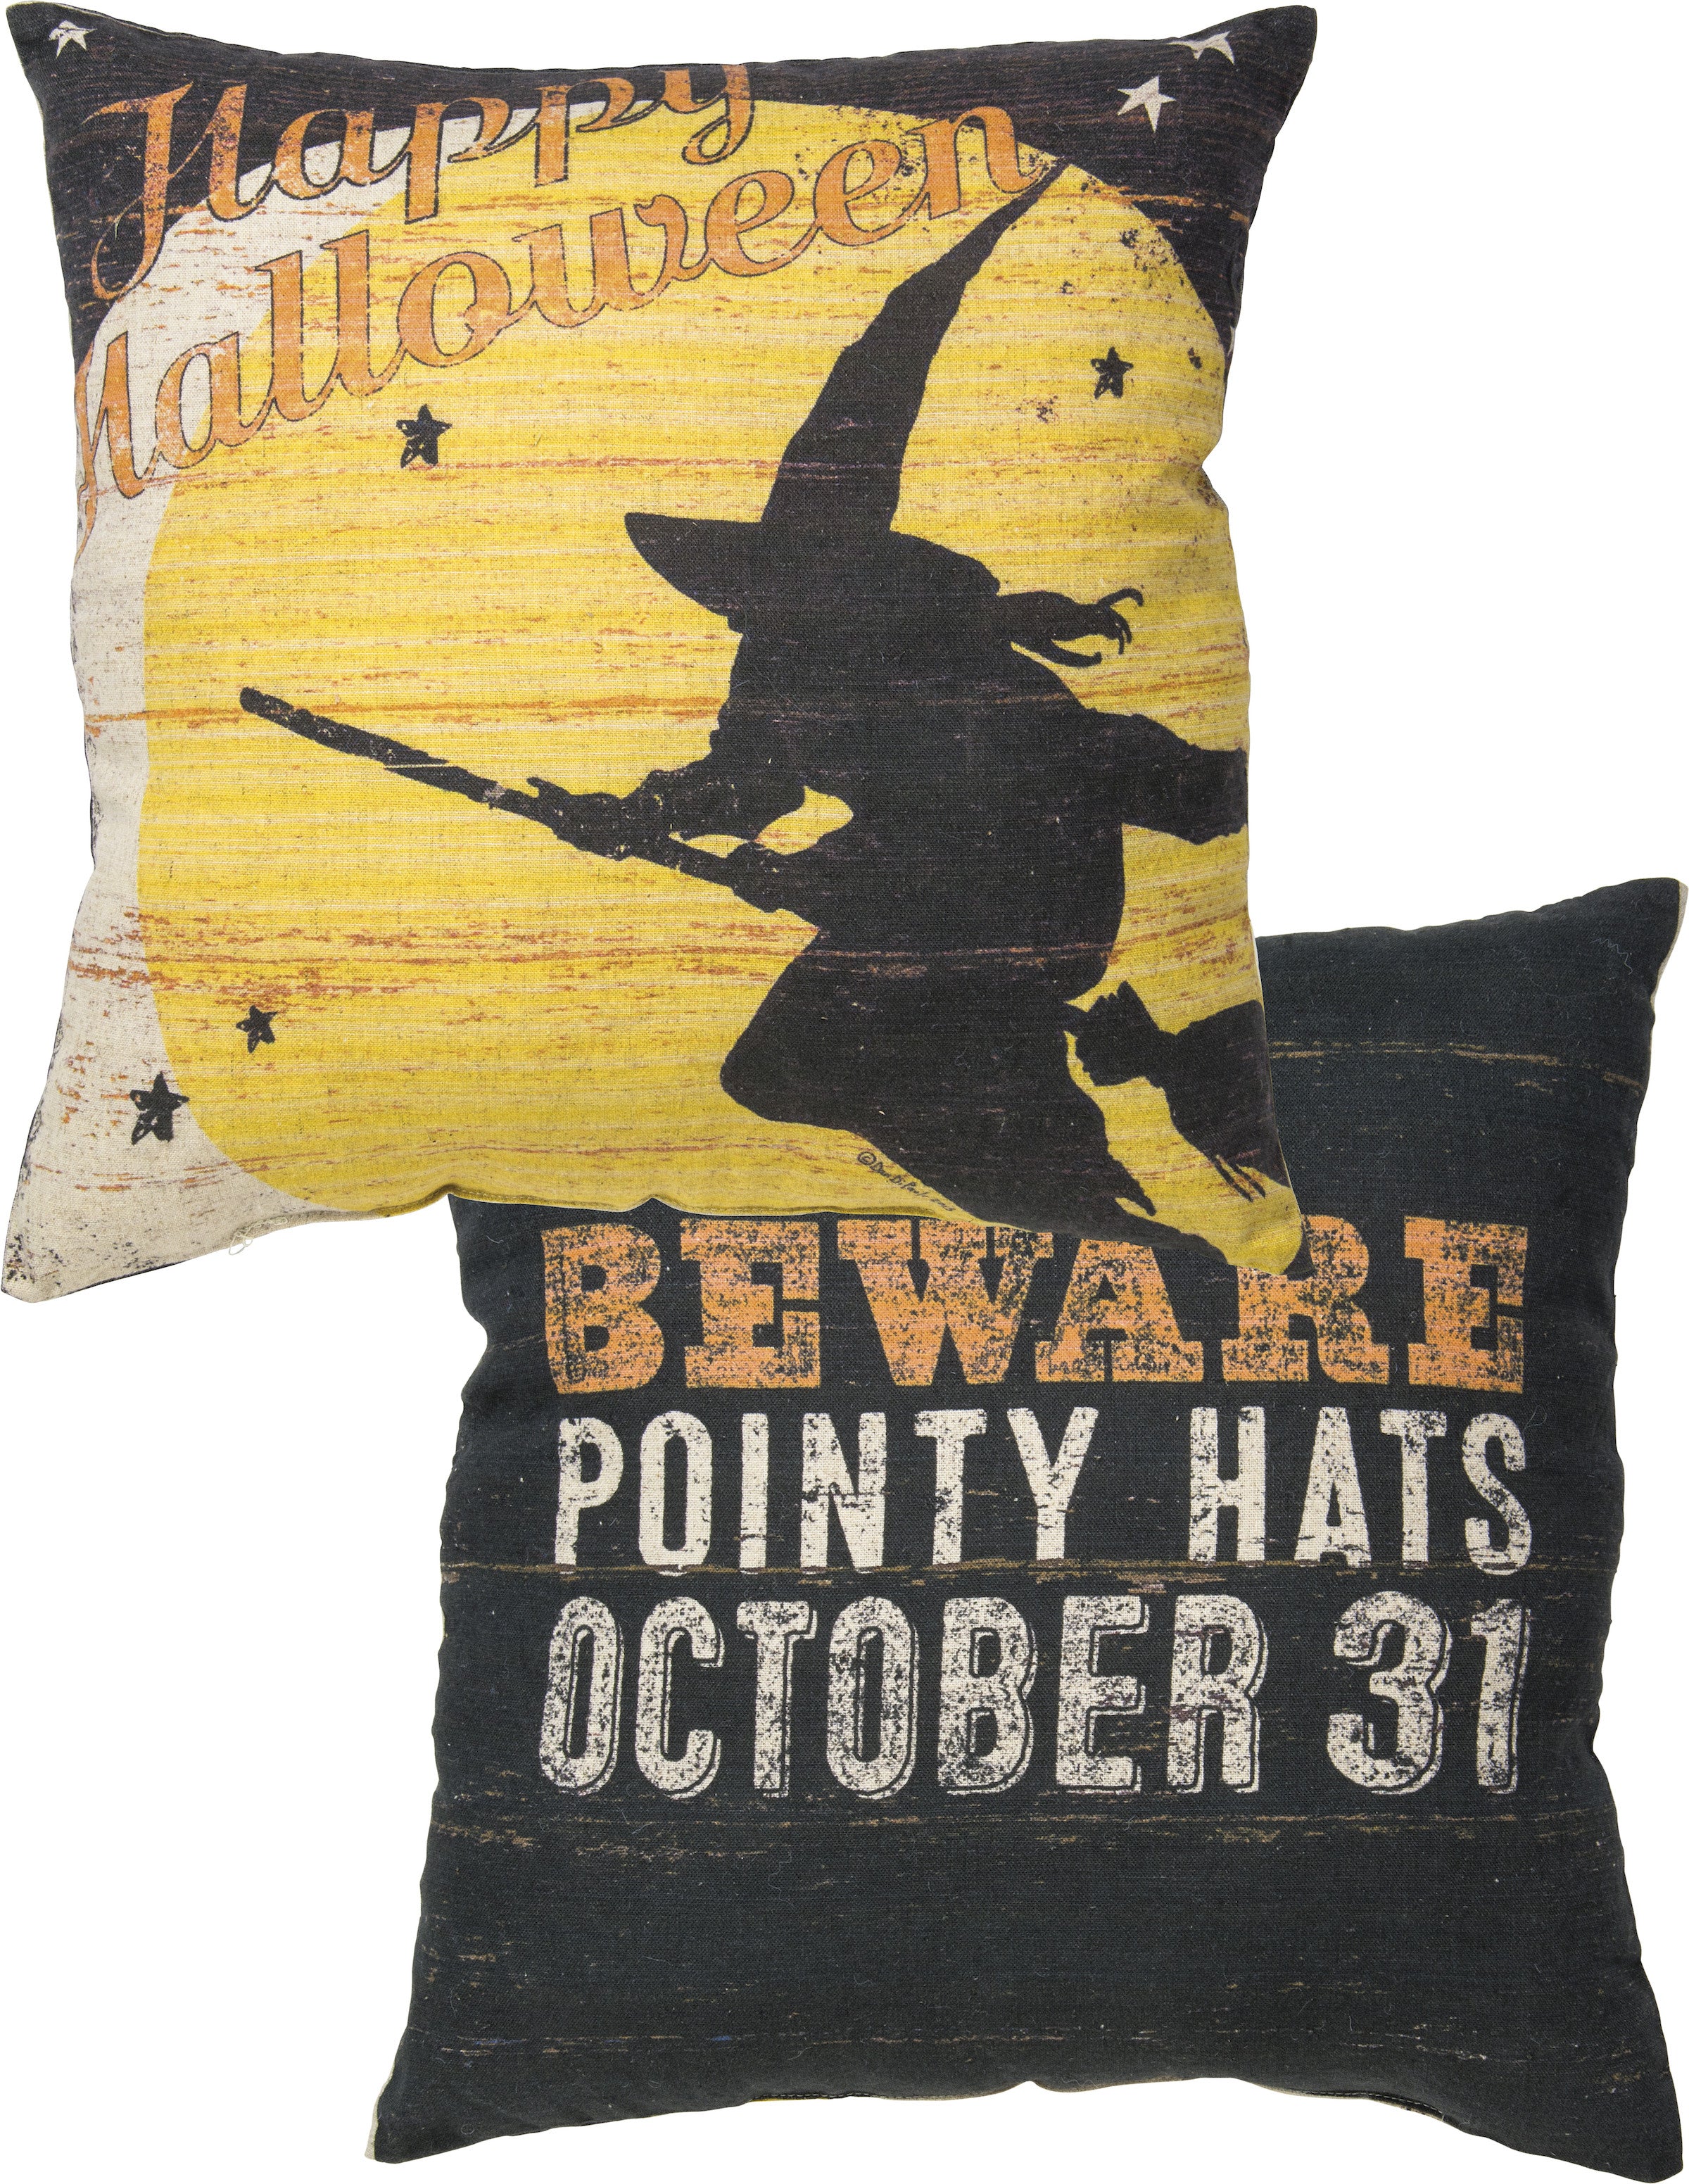 Happy Halloween Flying Witch Pillow - Beware of Pointy Hats Oct 31st